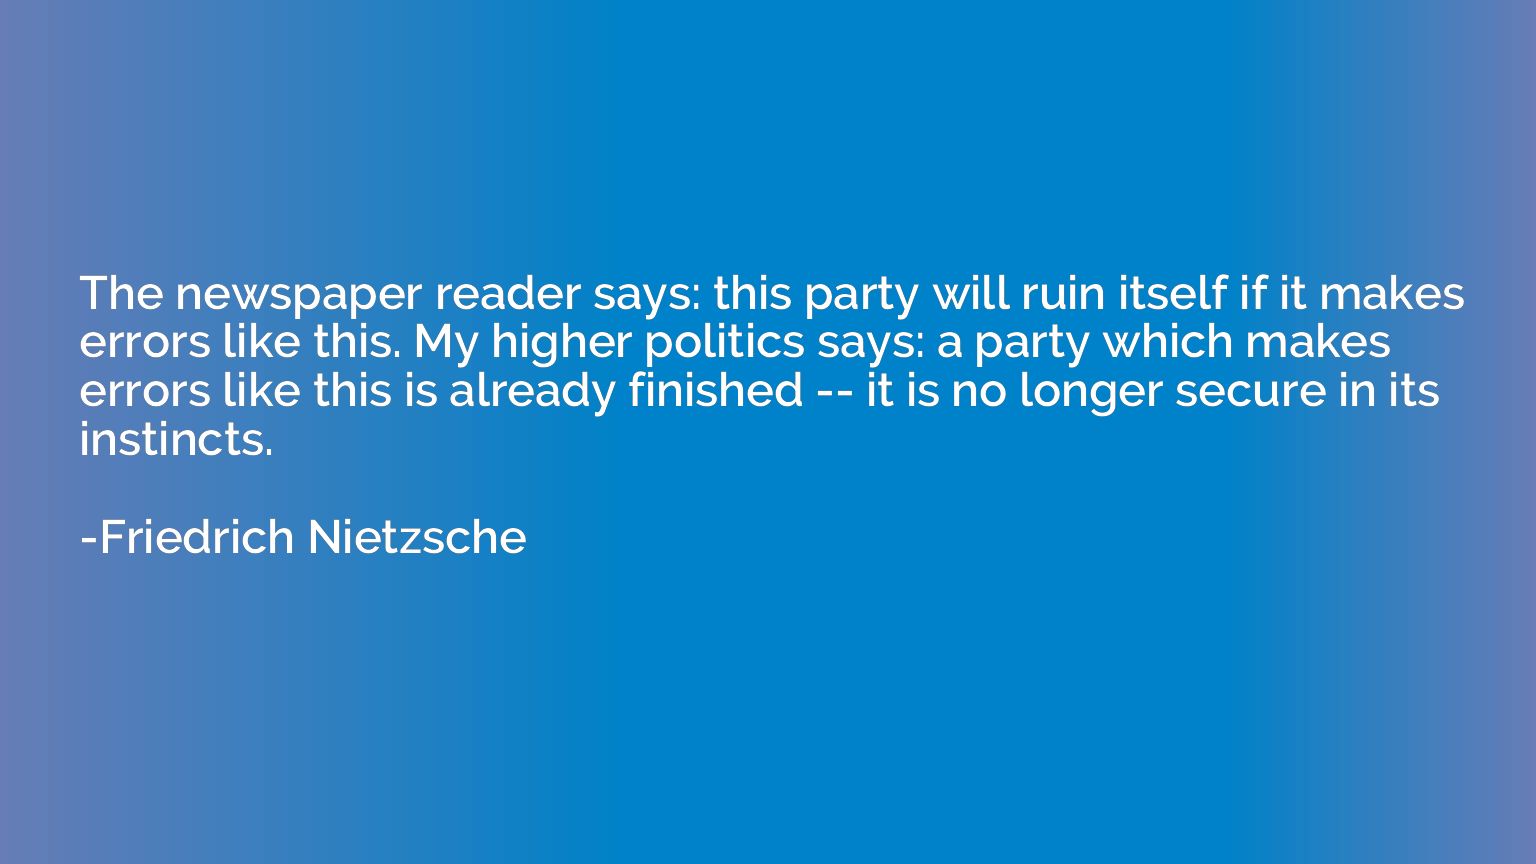 The newspaper reader says: this party will ruin itself if it